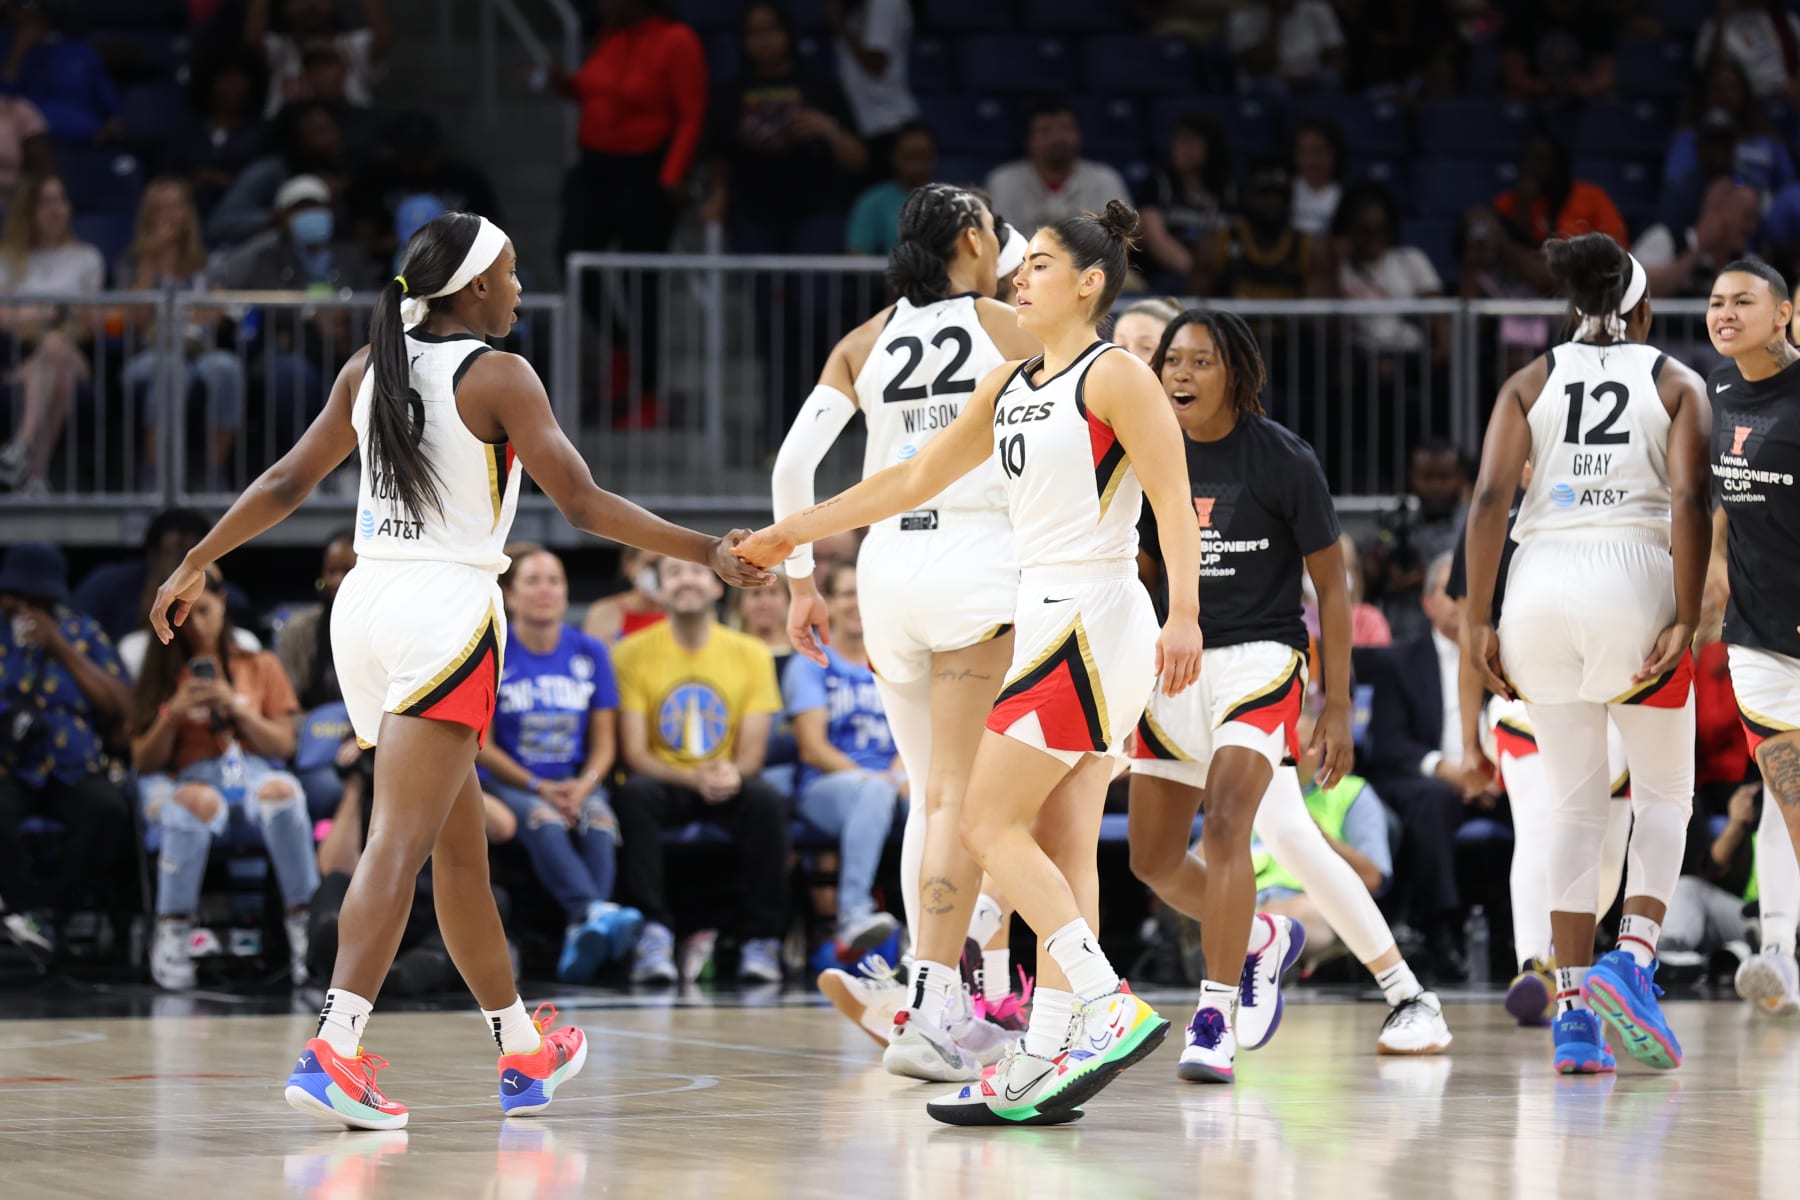 Plum's 3s lead Aces over Sky in WNBA Commissioner's Cup